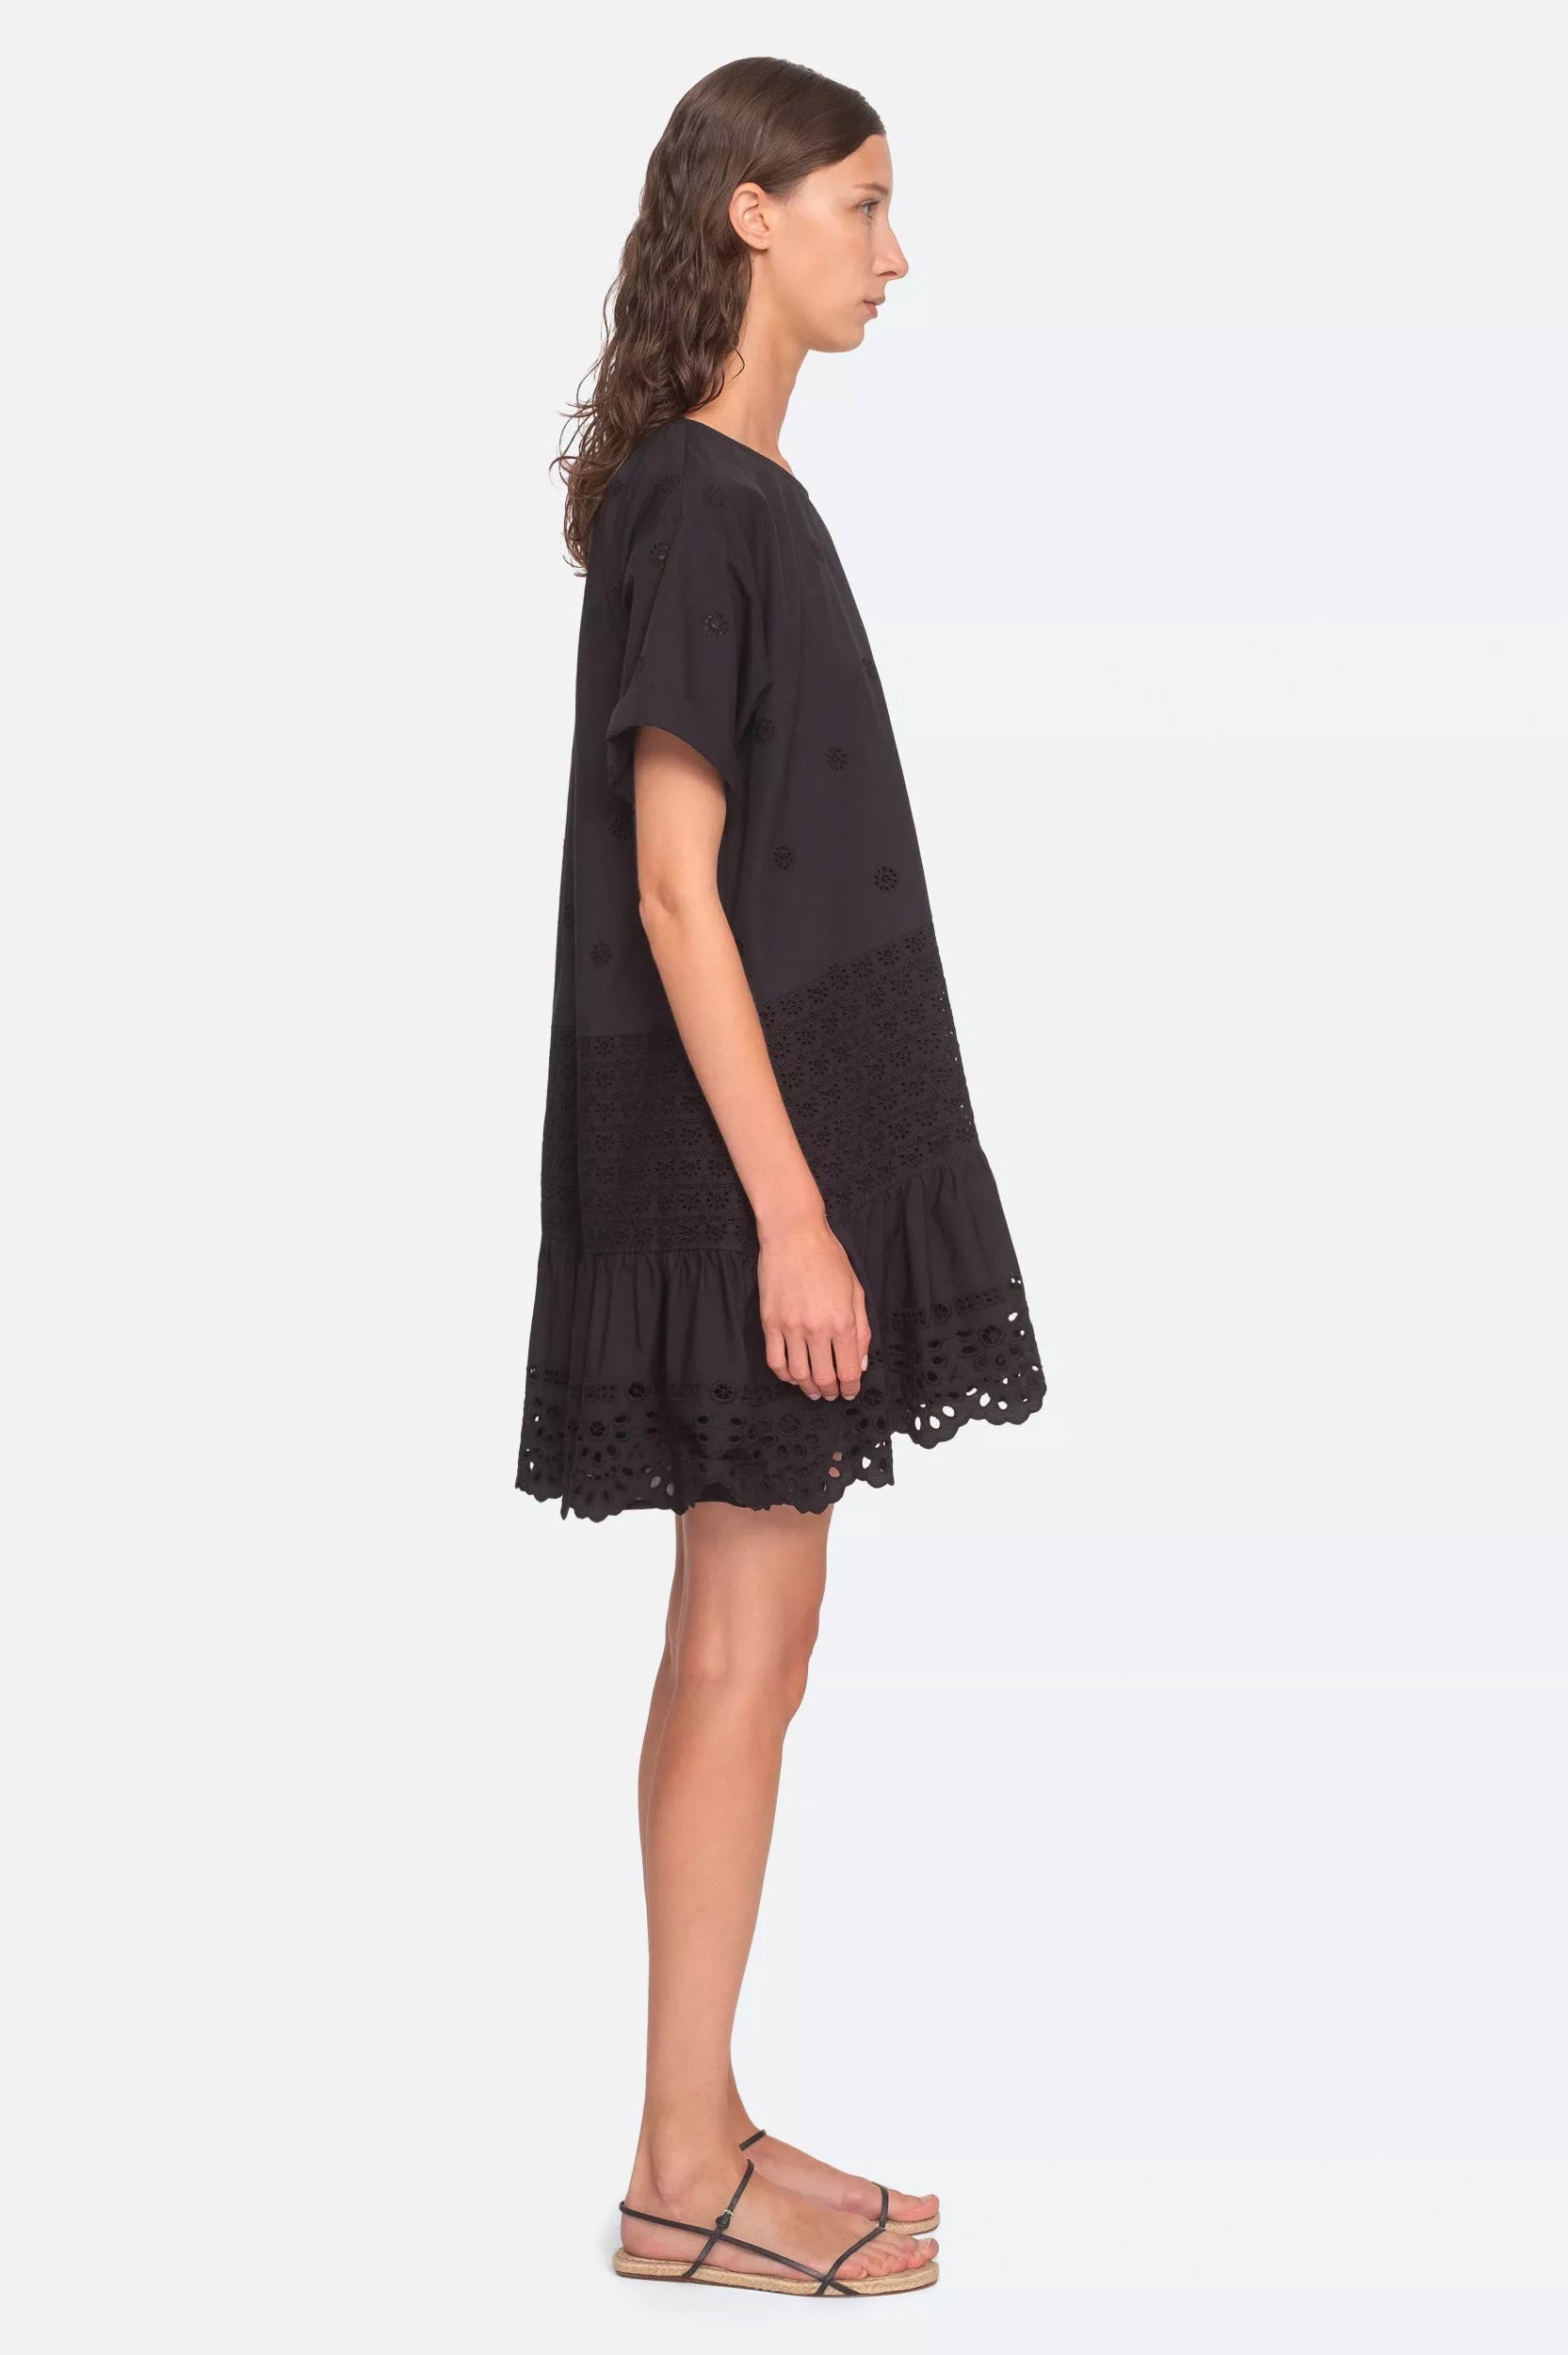 Elysse Embroidered Tunic Dress in Black